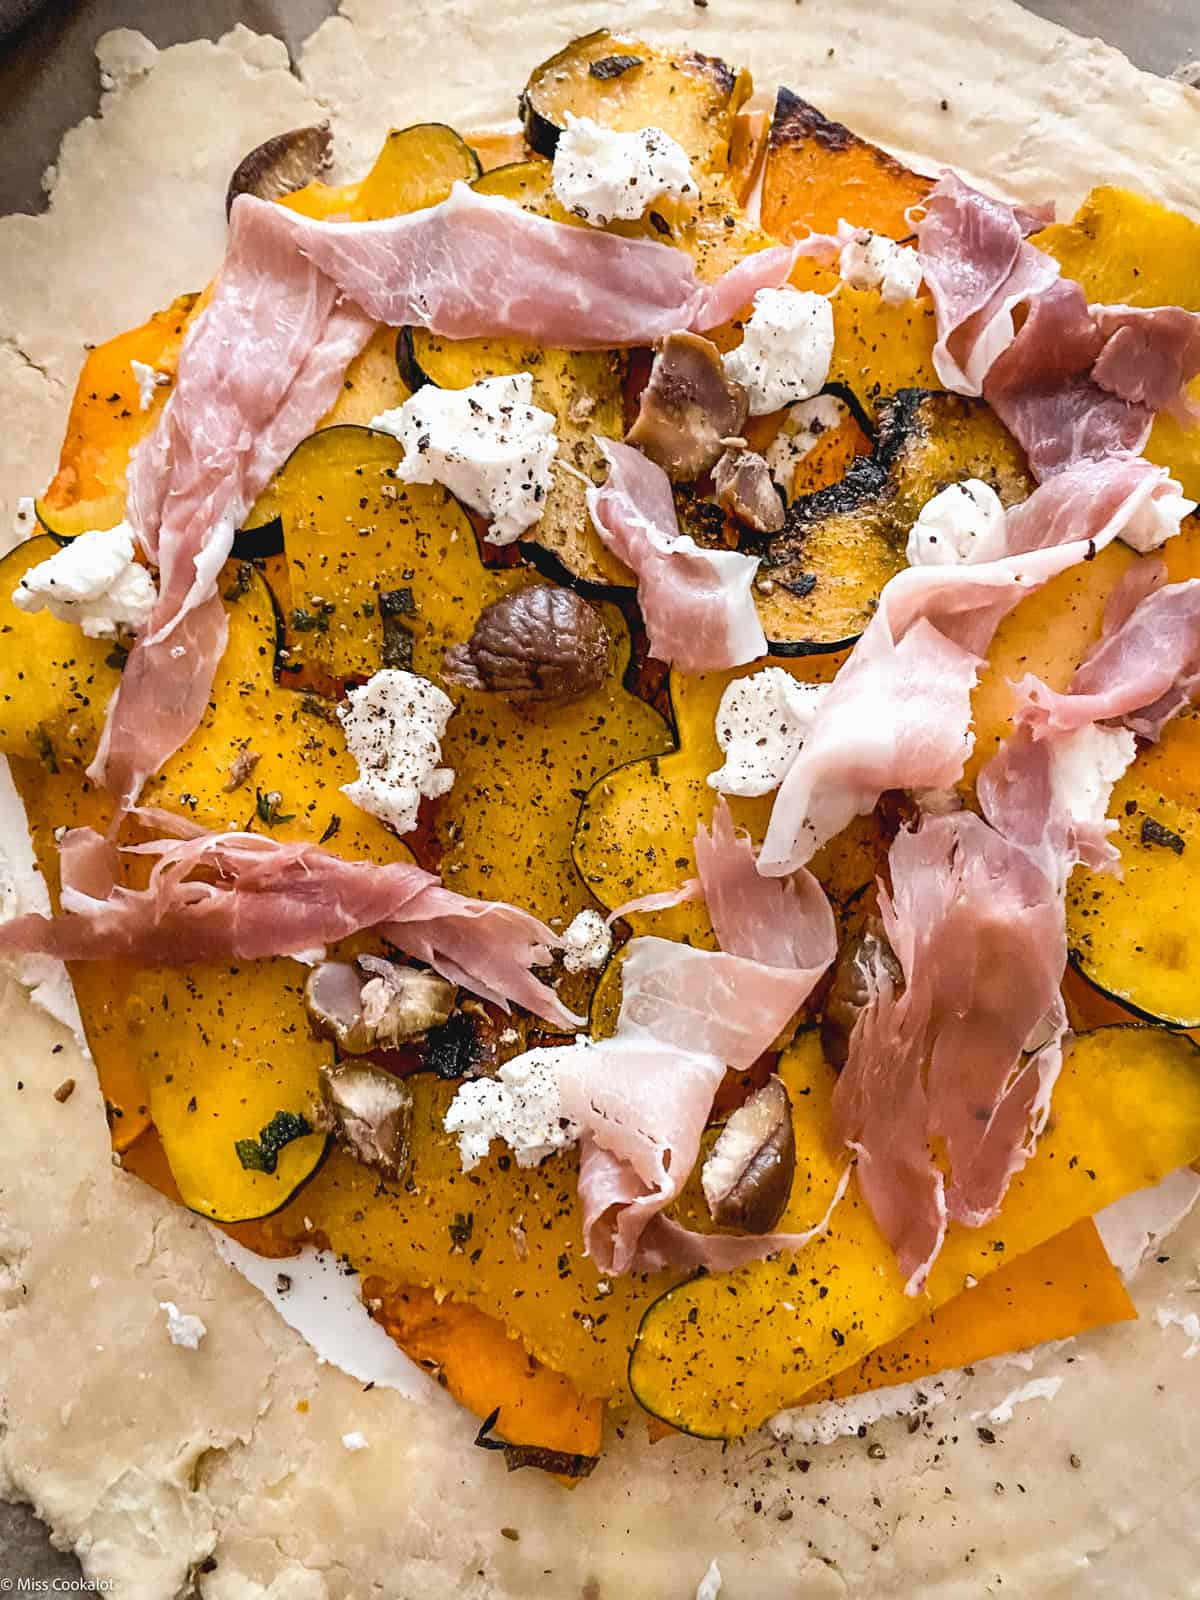 A galette crust with goat cheese squash, prosciutto and chestnuts on parchment paper.